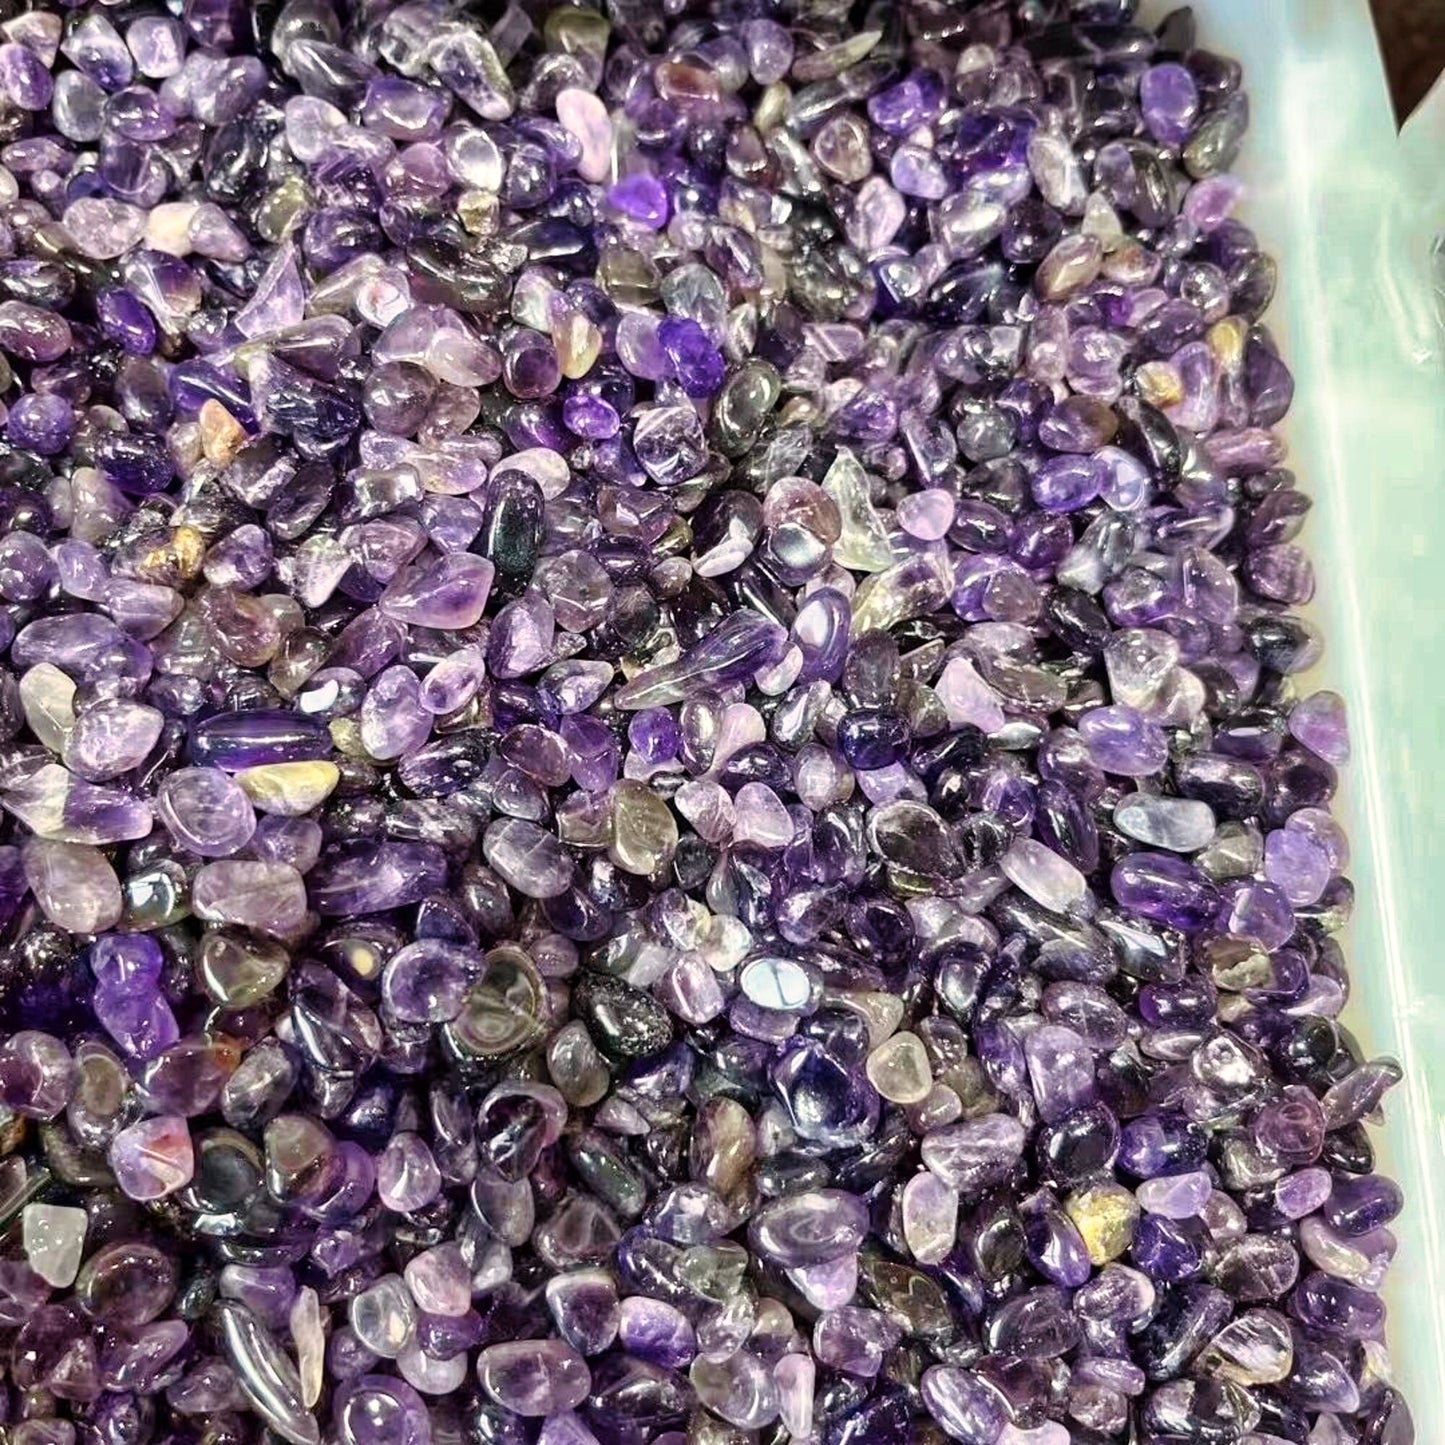 Rough Crystal Stone for Flowerpot and Fish Tank Decor - Gemstones for Buddha Statue